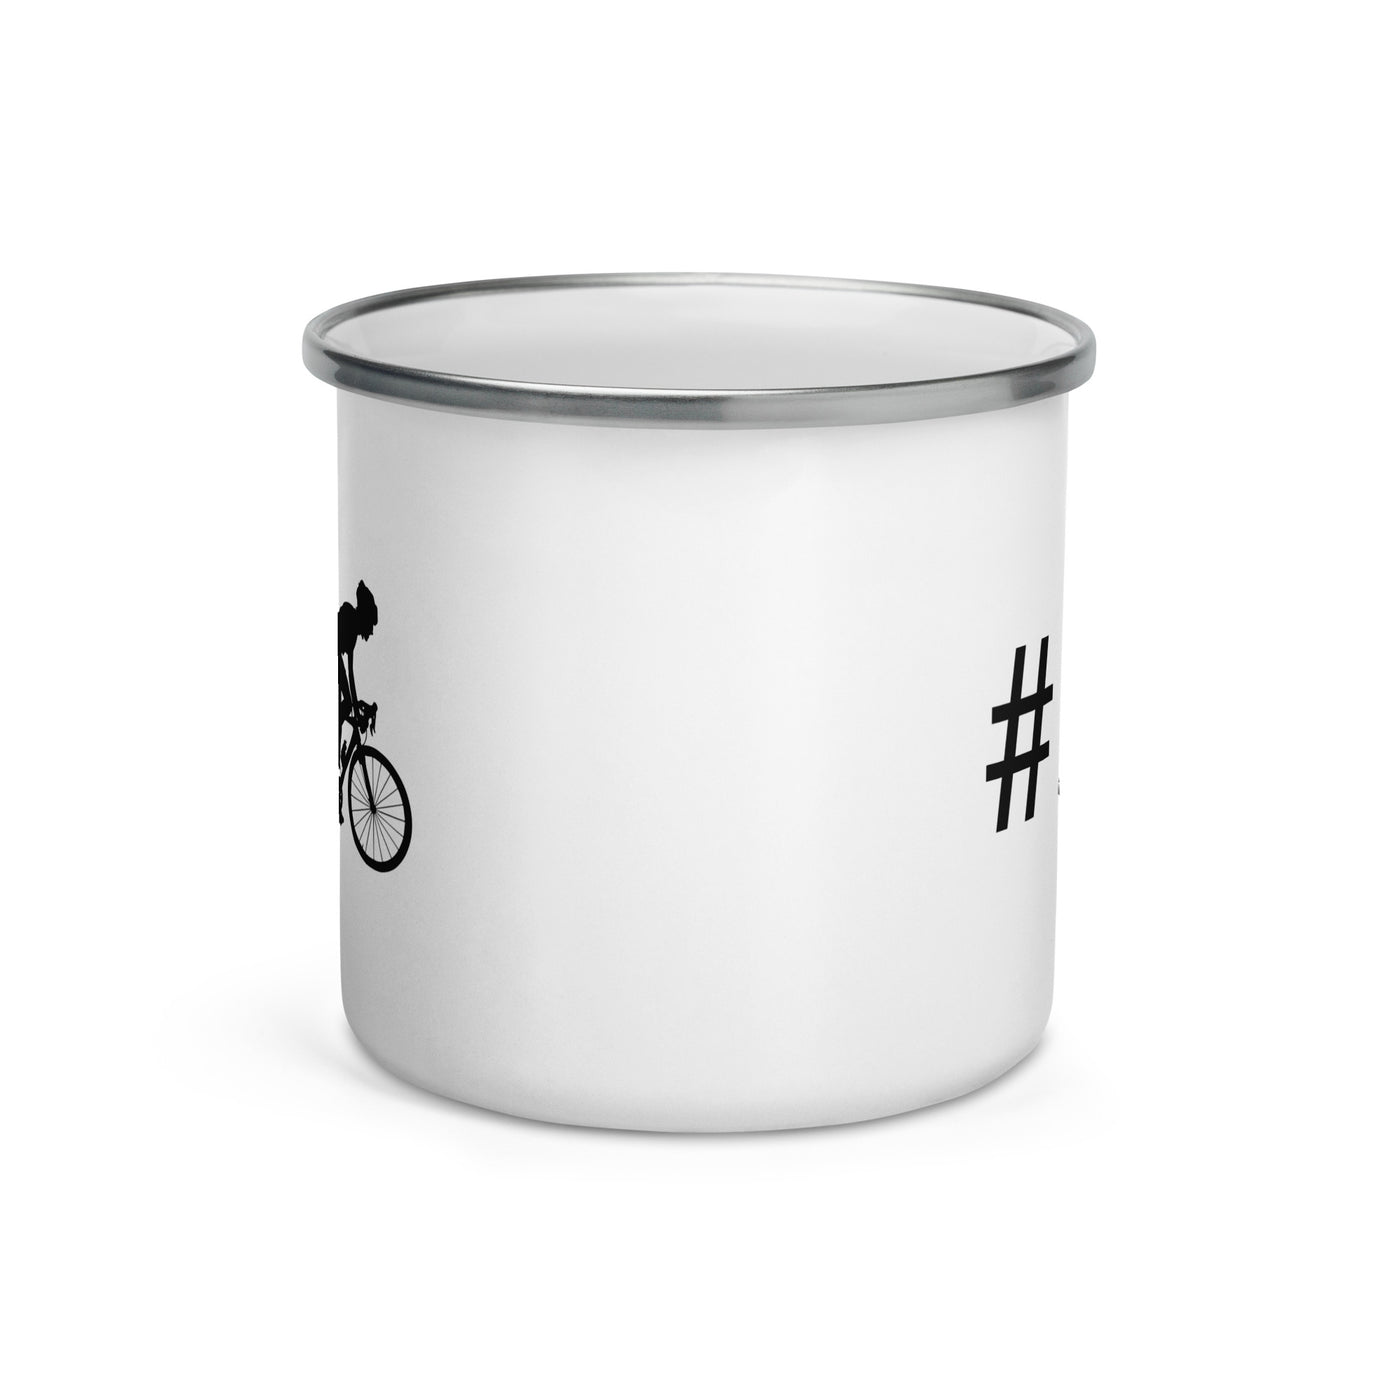 Hashtag - Man Cycling - Emaille Tasse fahrrad